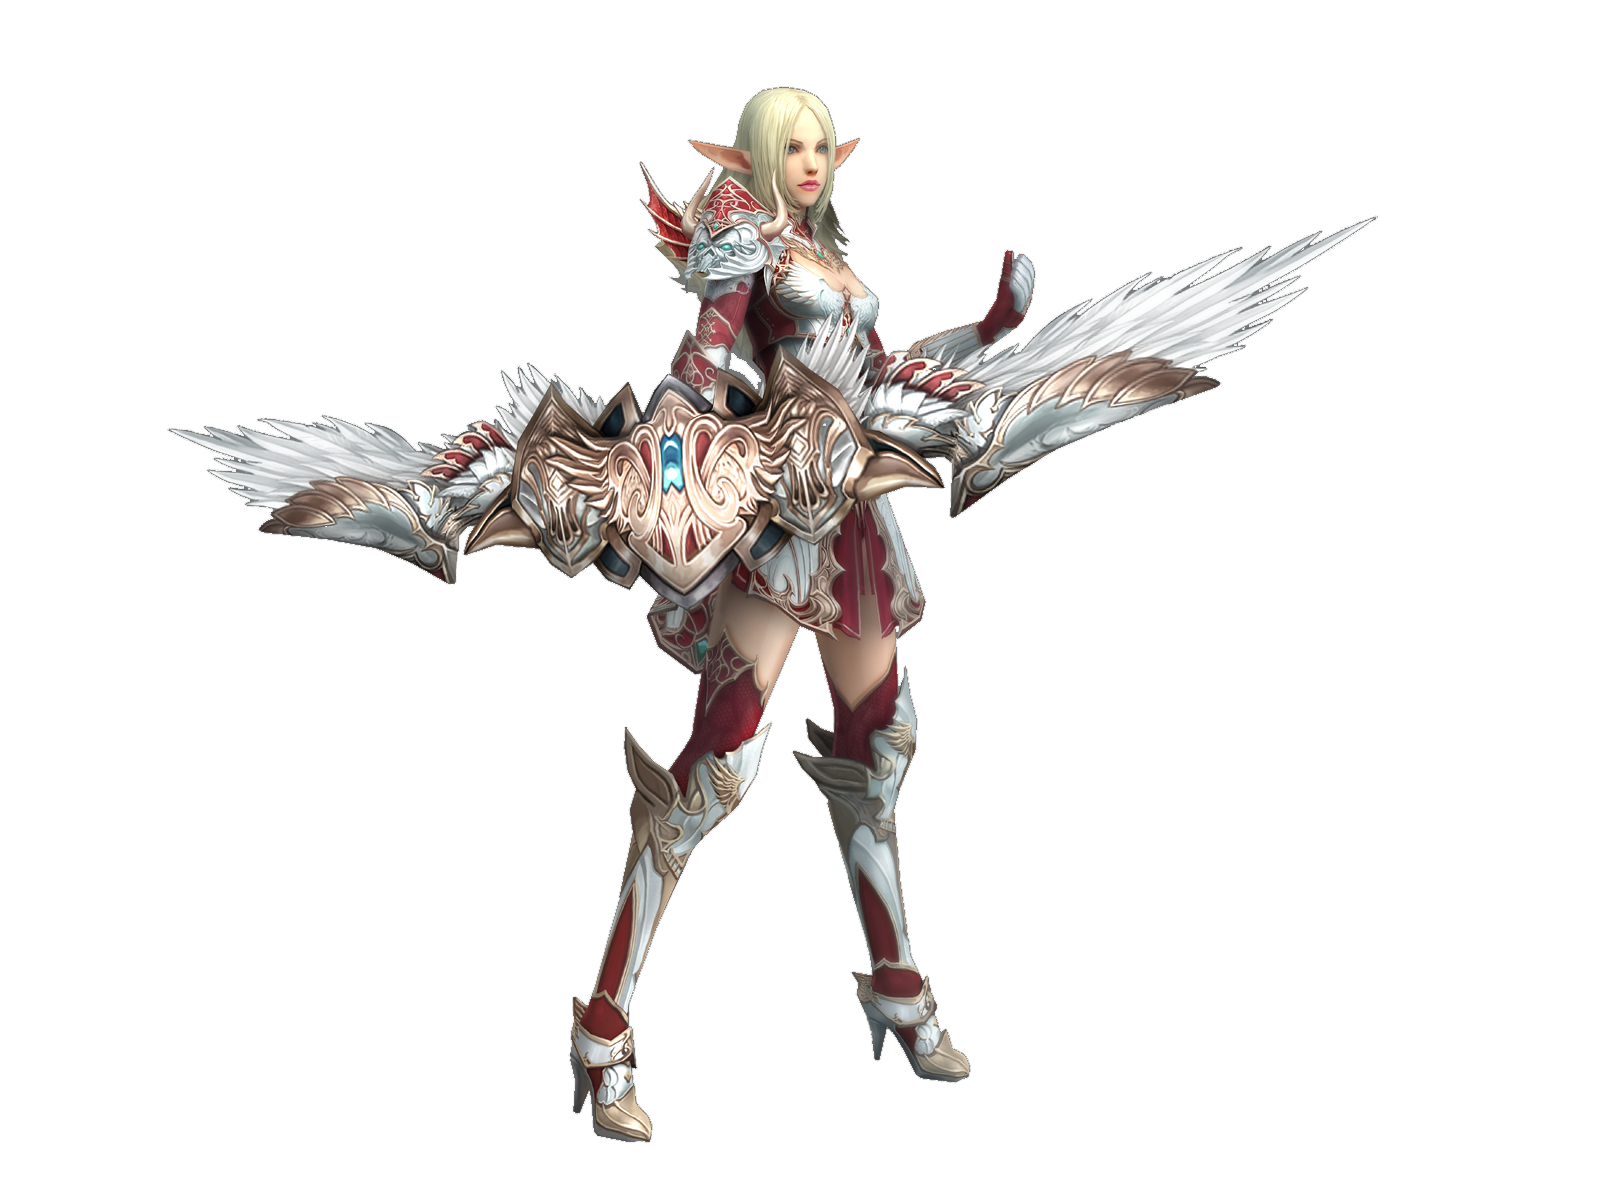 http://lineage2-game.ucoz.com/templates/race/Female_Elf.png